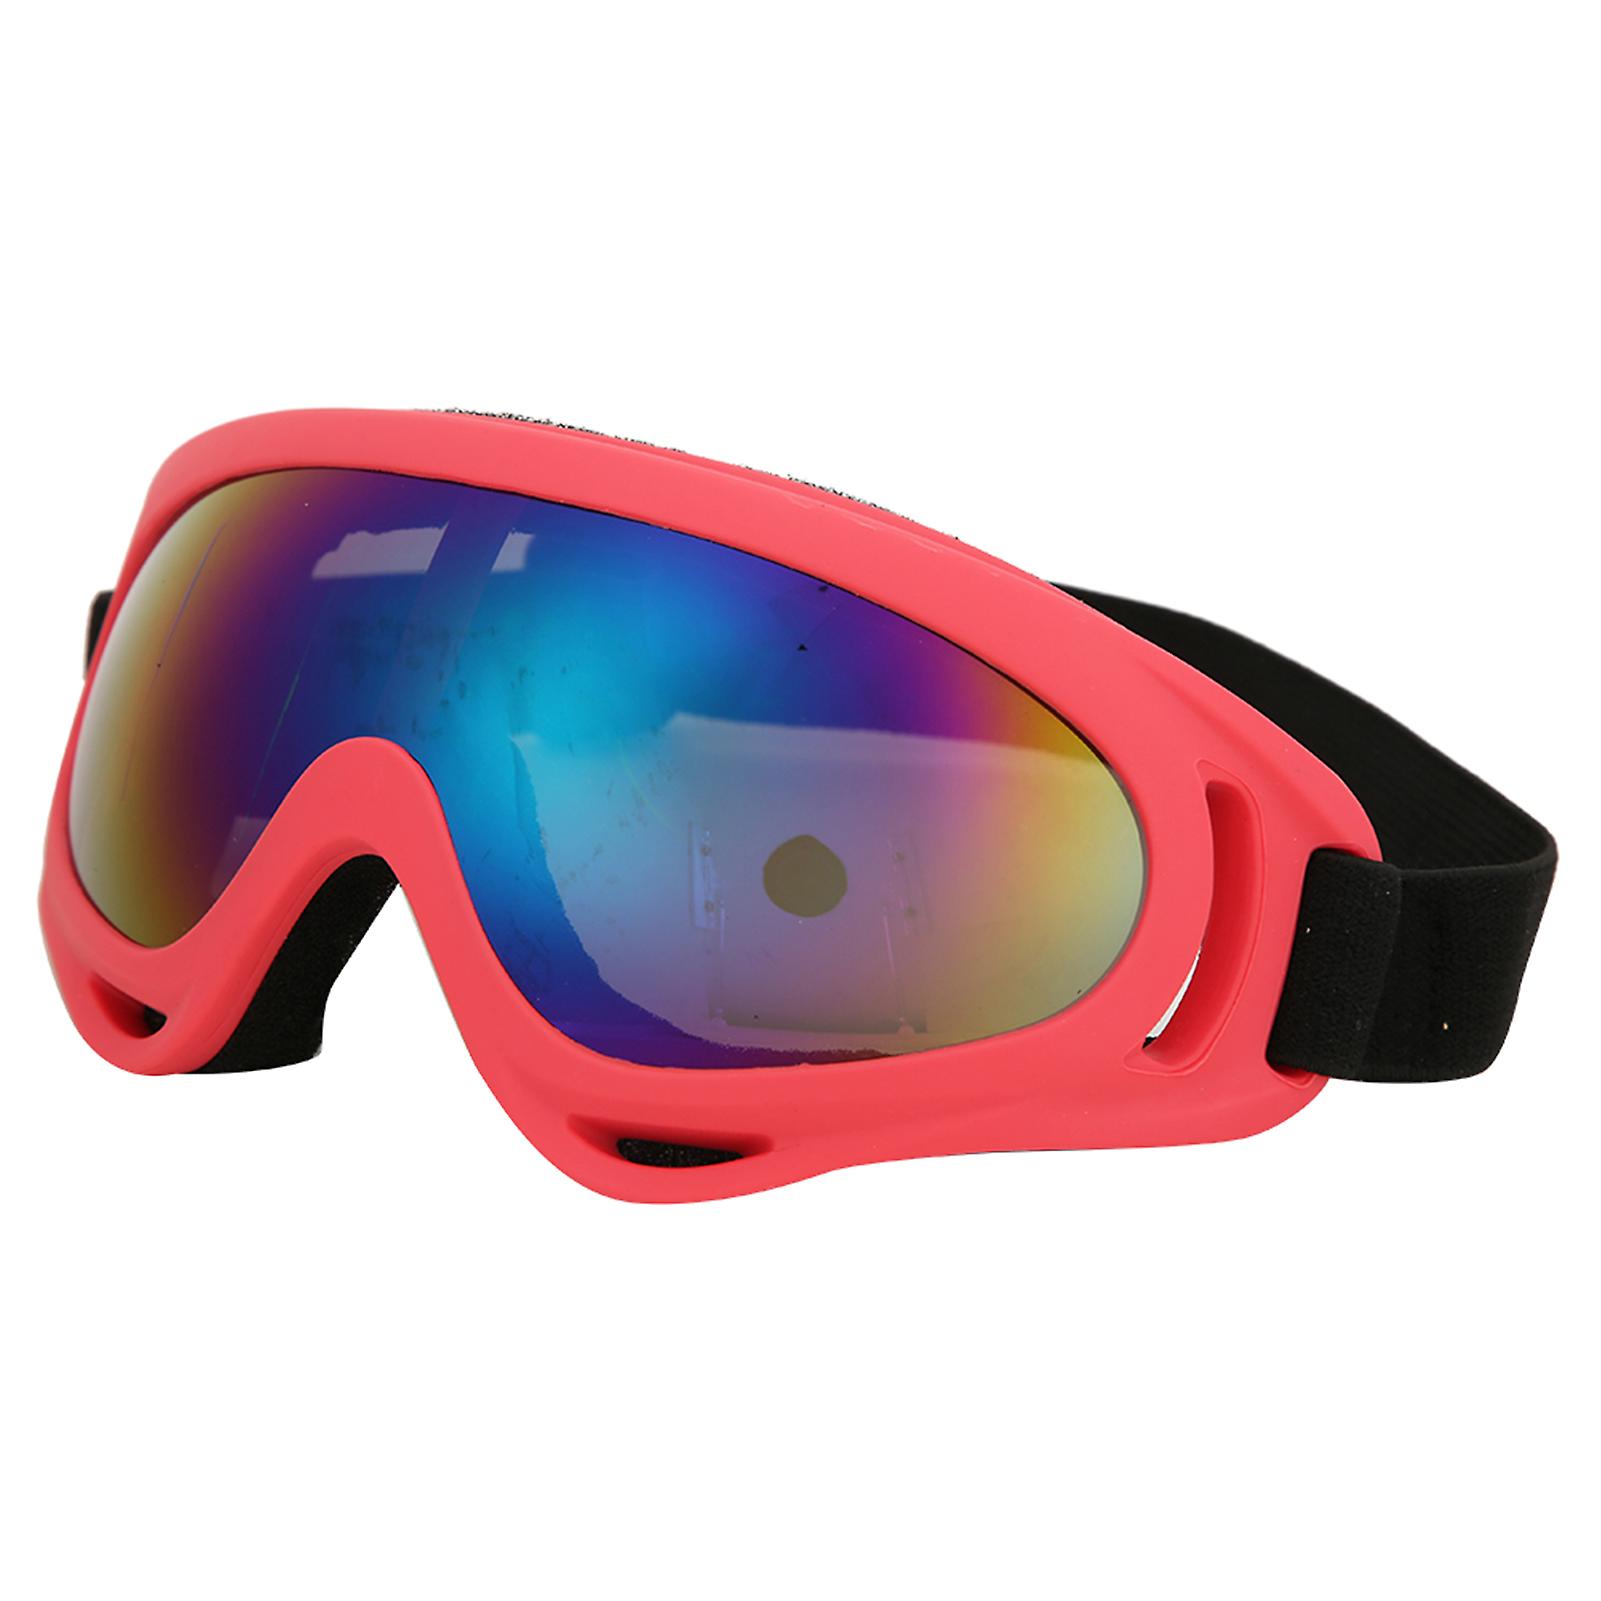 Pc Windproof Skiing Glasses Motorcycle Unisex Outdoor Sports Cycling Goggles For Adults Childrenred Frame Color Lens